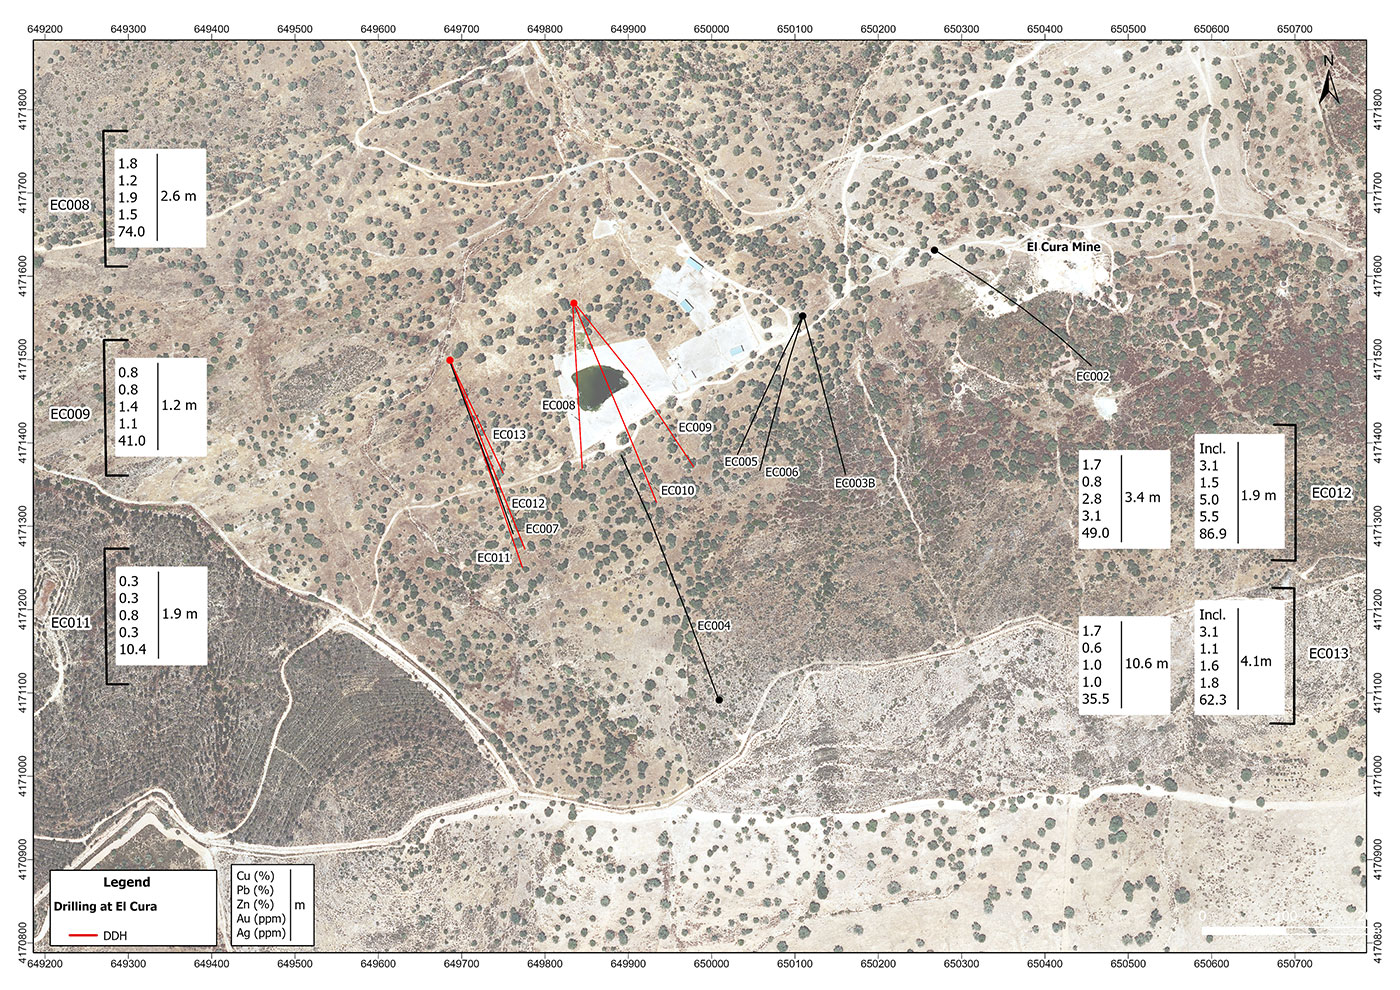 Figure 2: Plan map showing drill hole traces of the El Cura drilling, in red color holes in this NR.